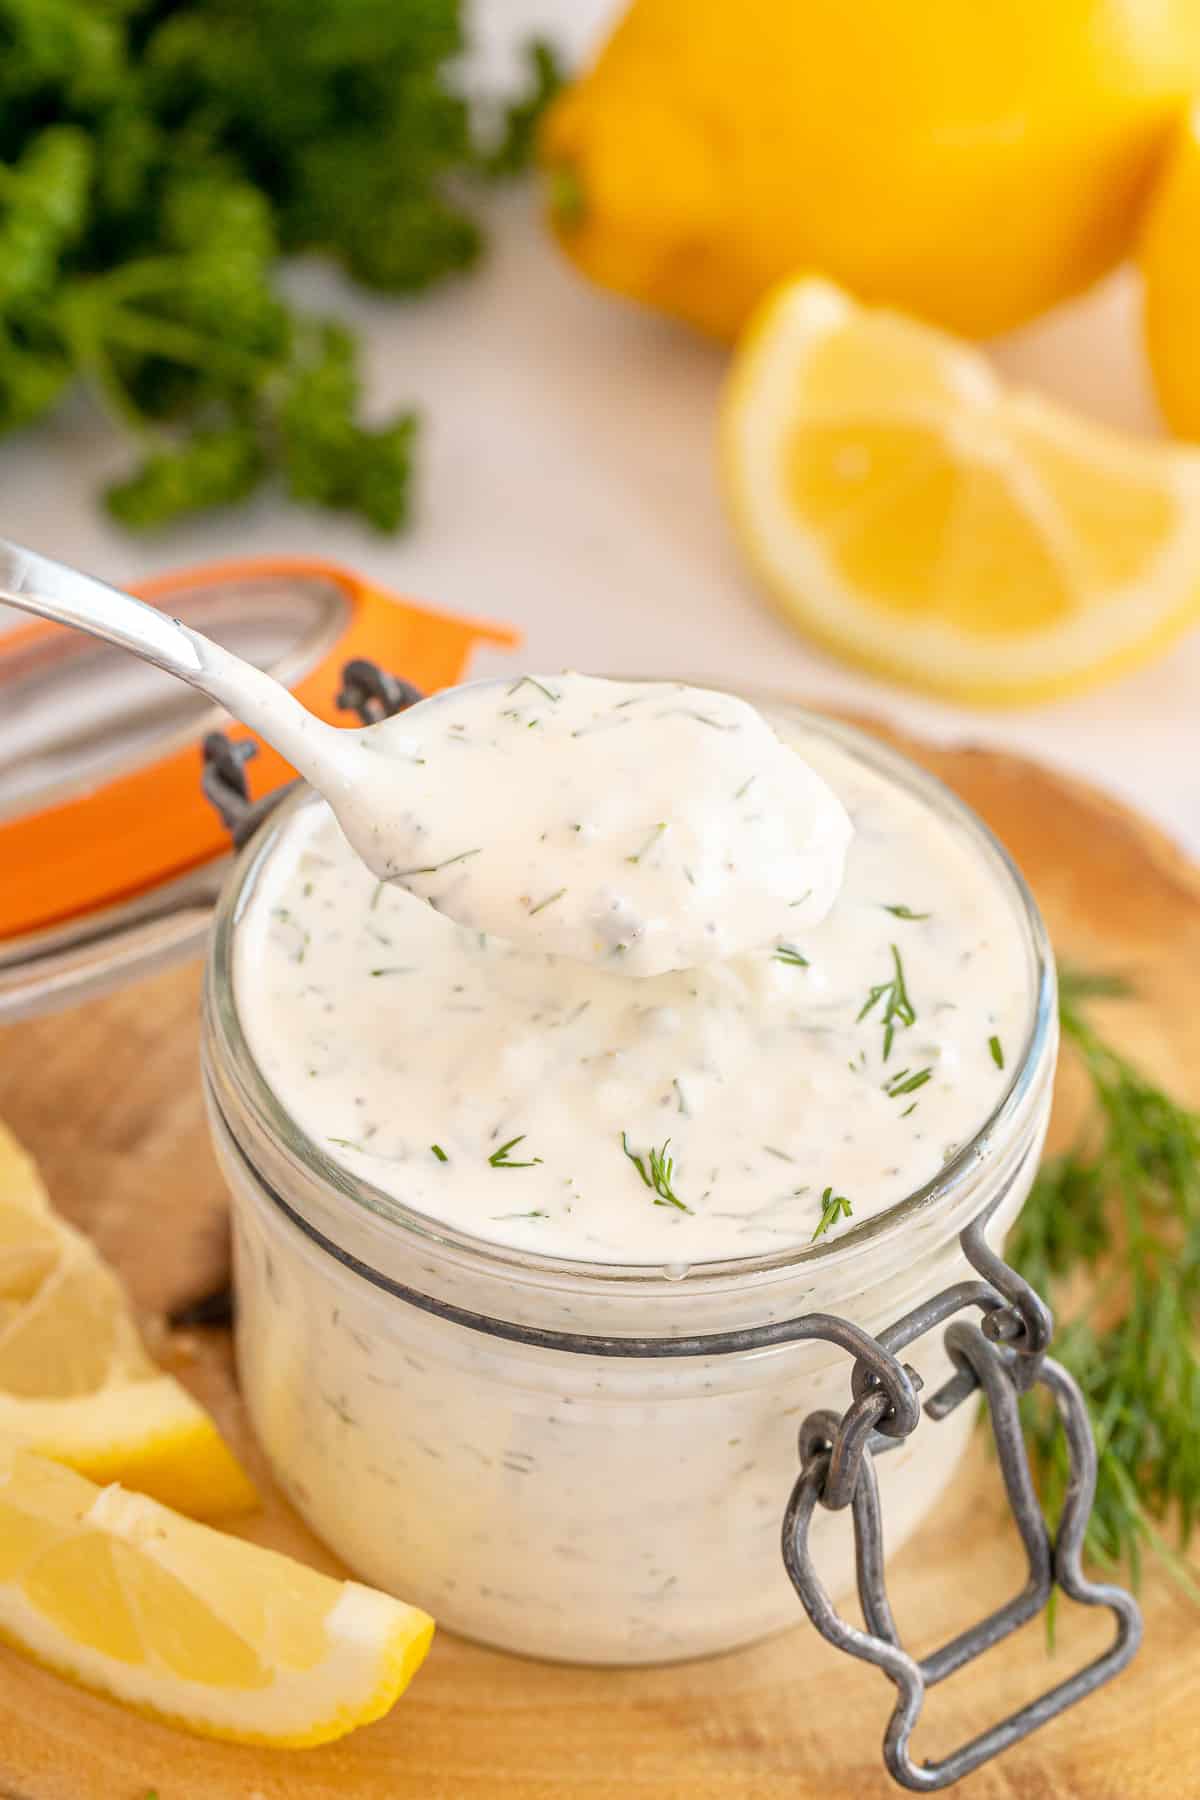 A small spoon scoops tartar sauce from a jar.